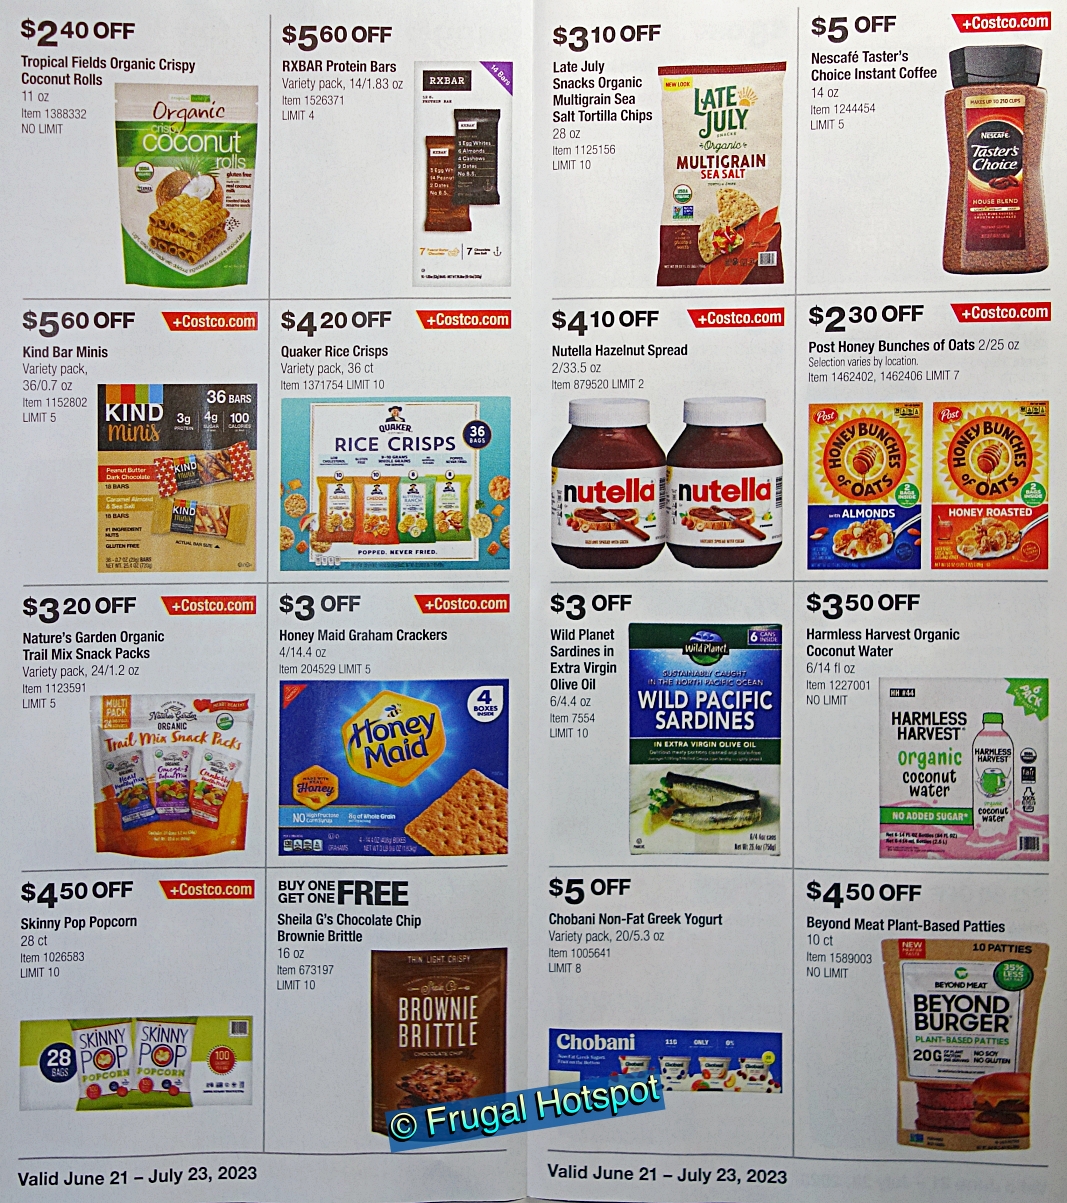 Costco Coupon Book JUNE JULY 2023 | P 16 and 17